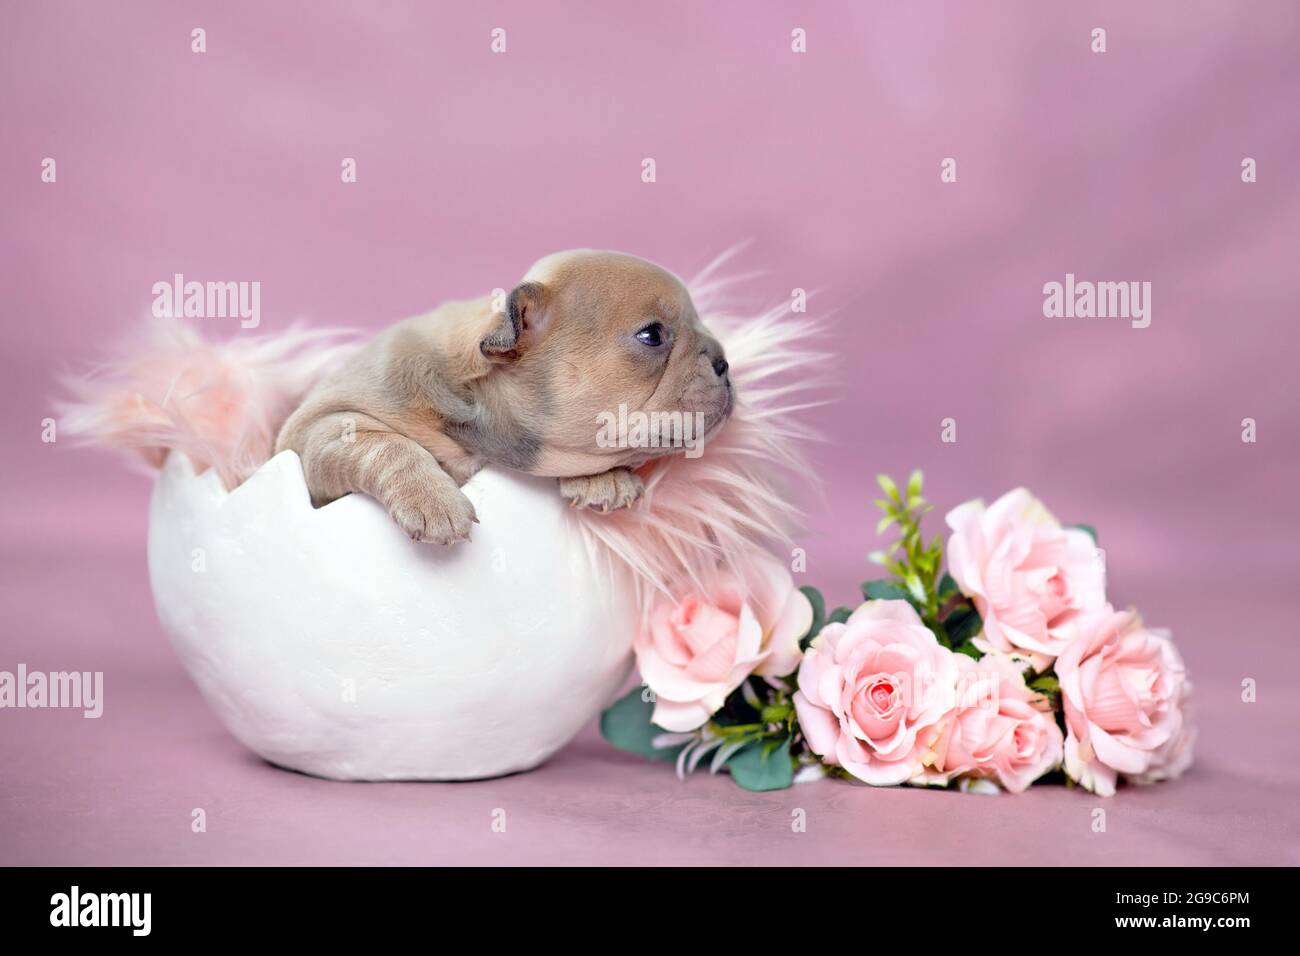 Tiny French Bulldog dog puppy hatching out of egg shell next to roses on pink background Stock Photo